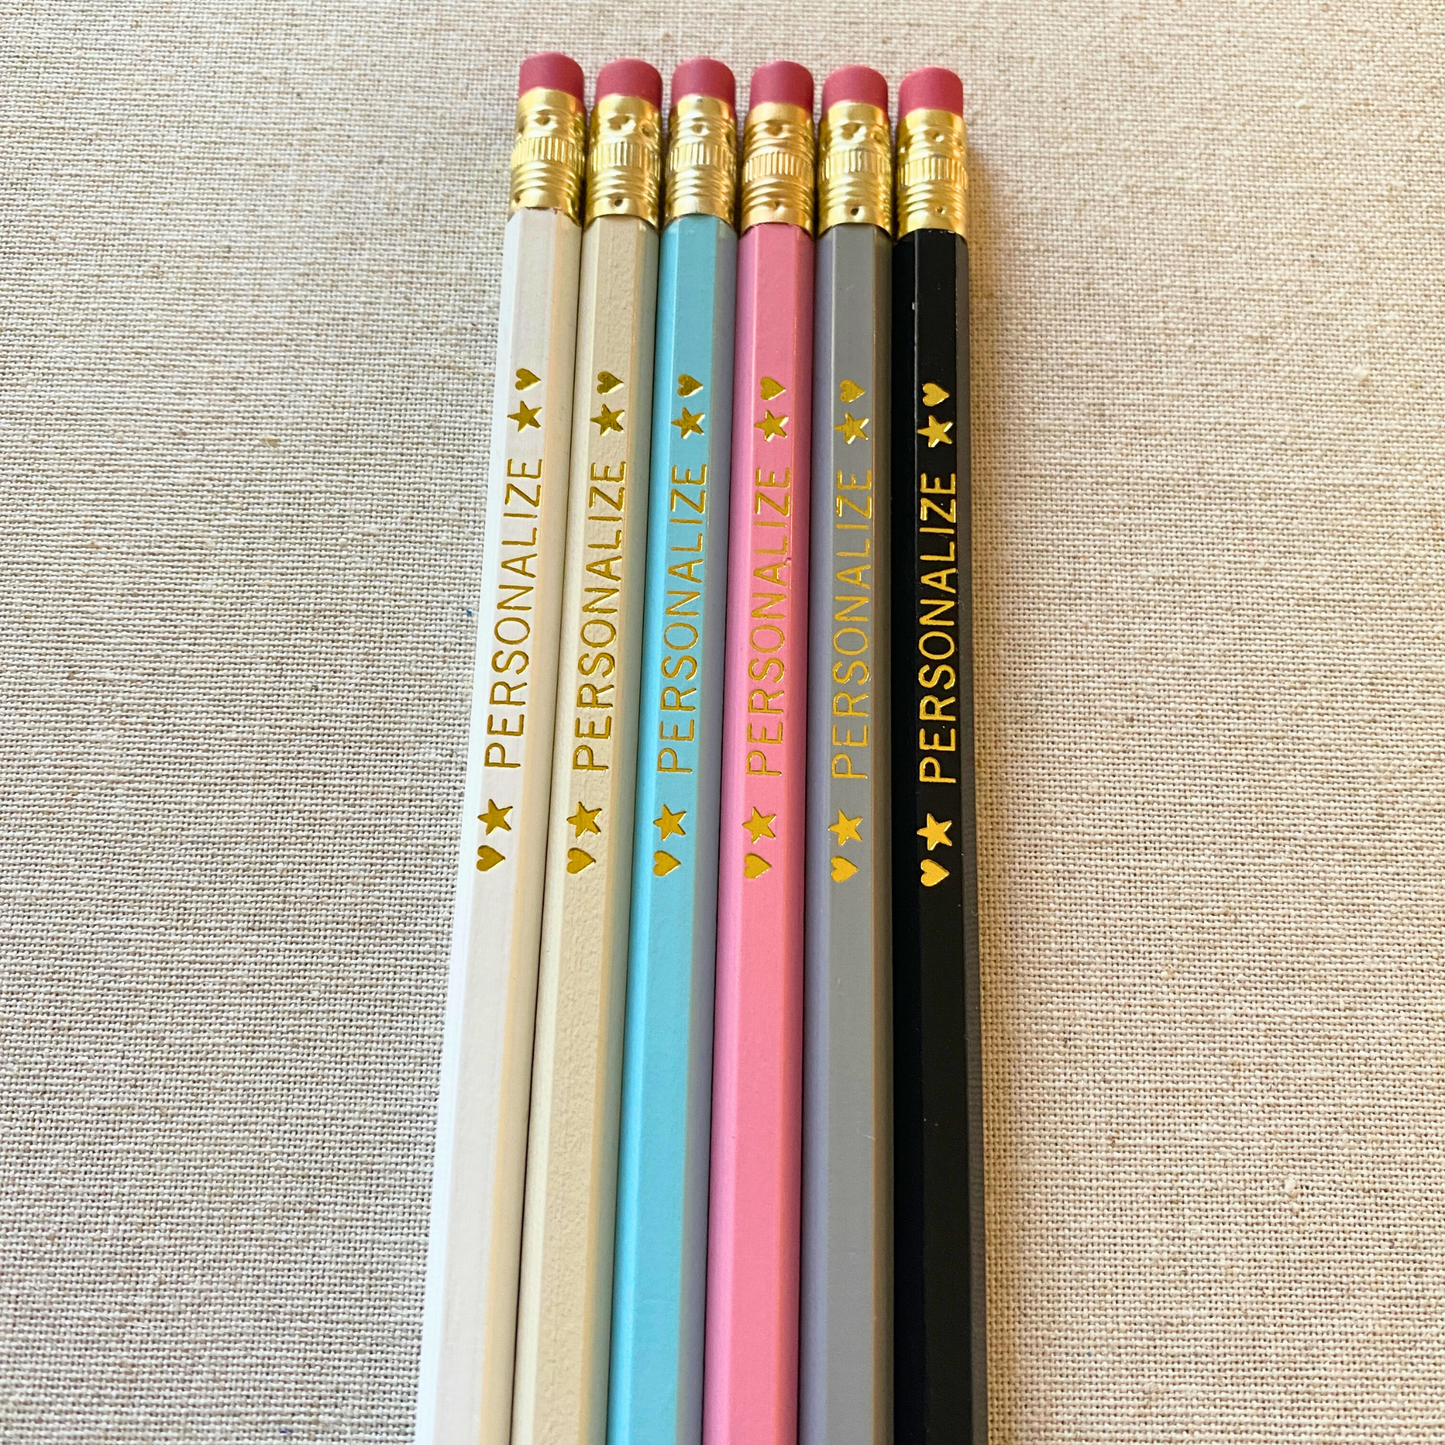 6 Personalized Pencil Set SERENITY